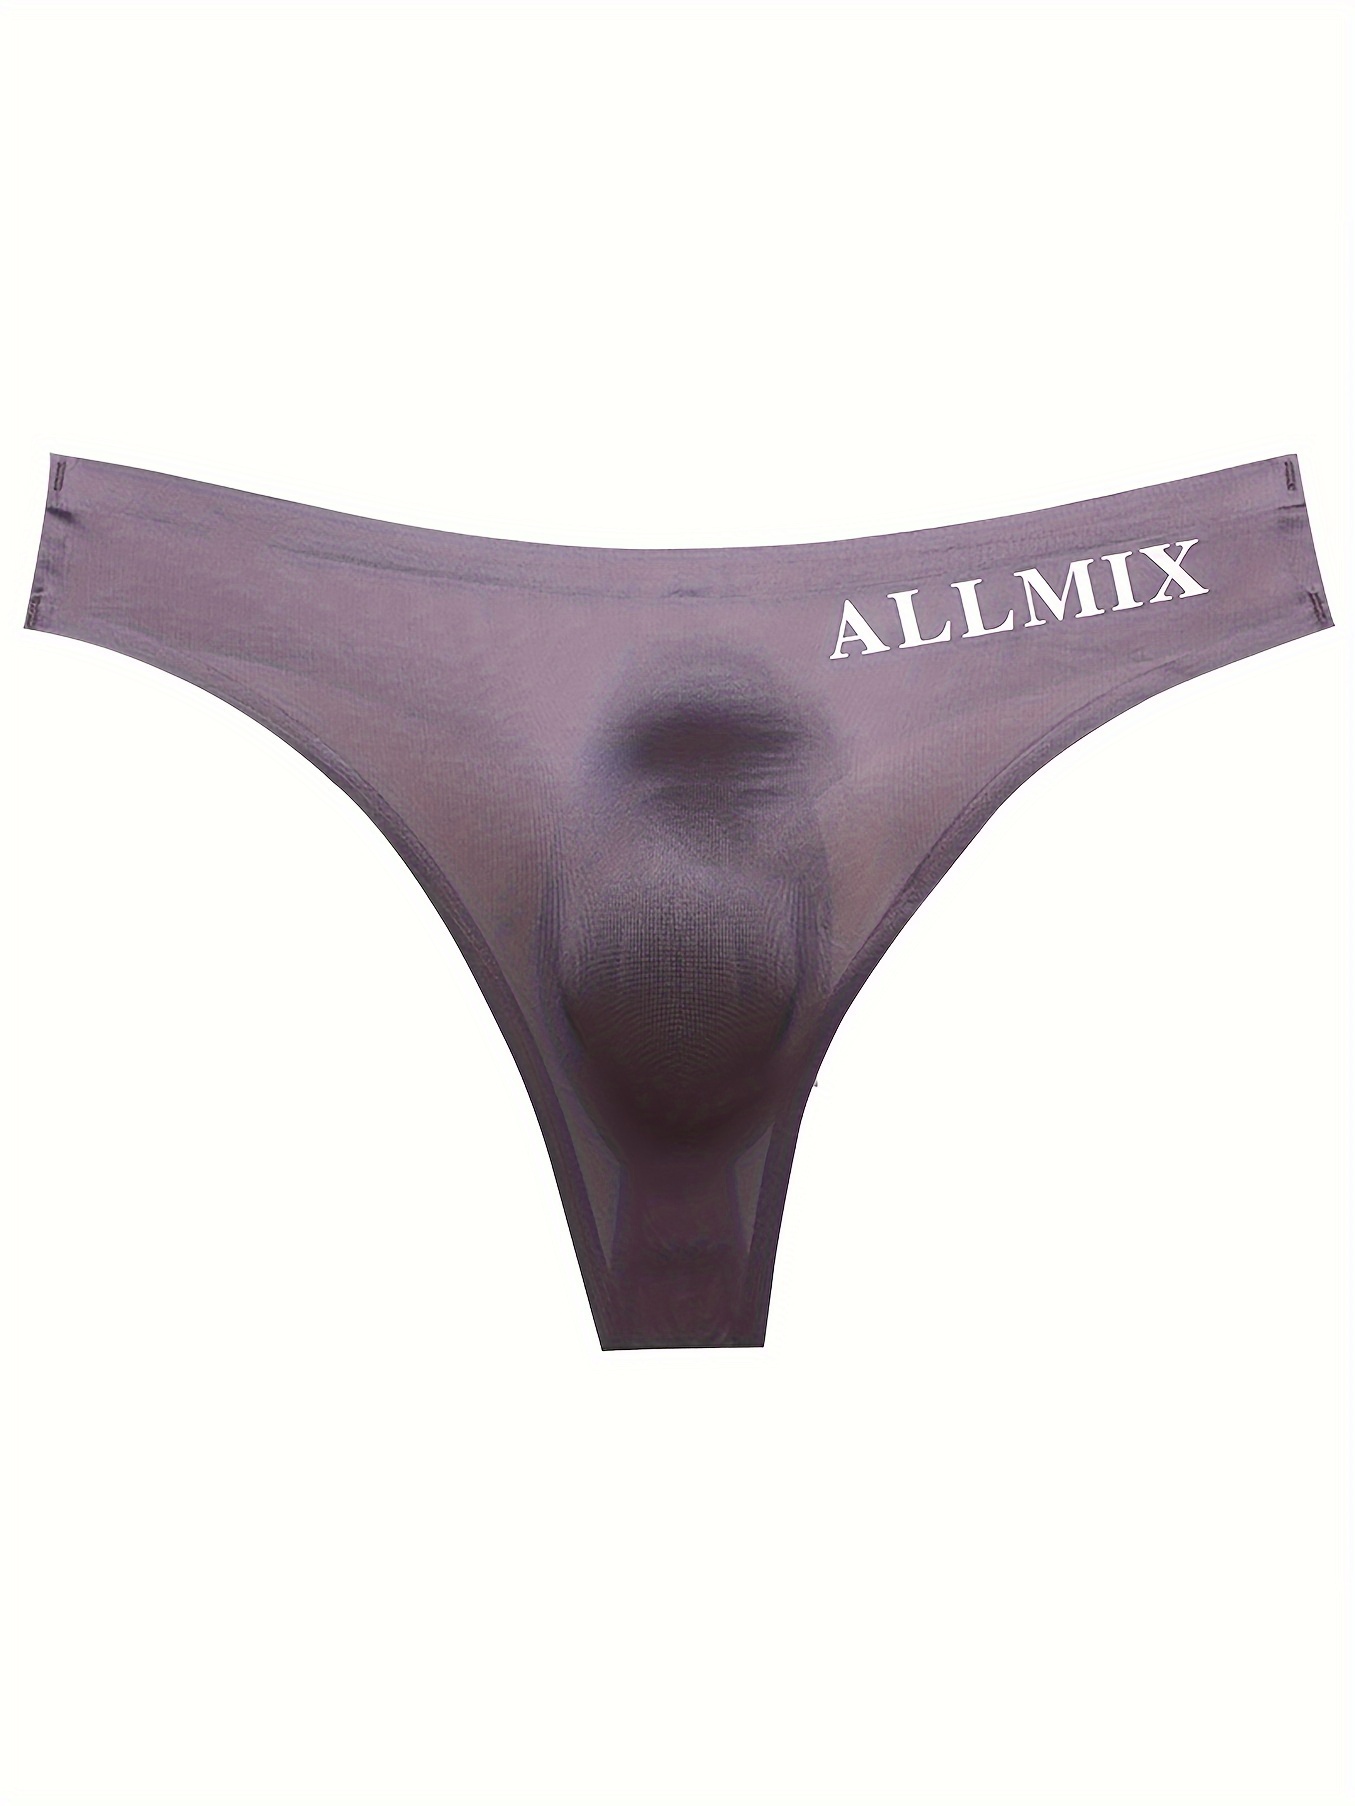 Women's Seamless Thongs Underwear Ice Silk Comfy G-String Pack of 3, Shop  Today. Get it Tomorrow!